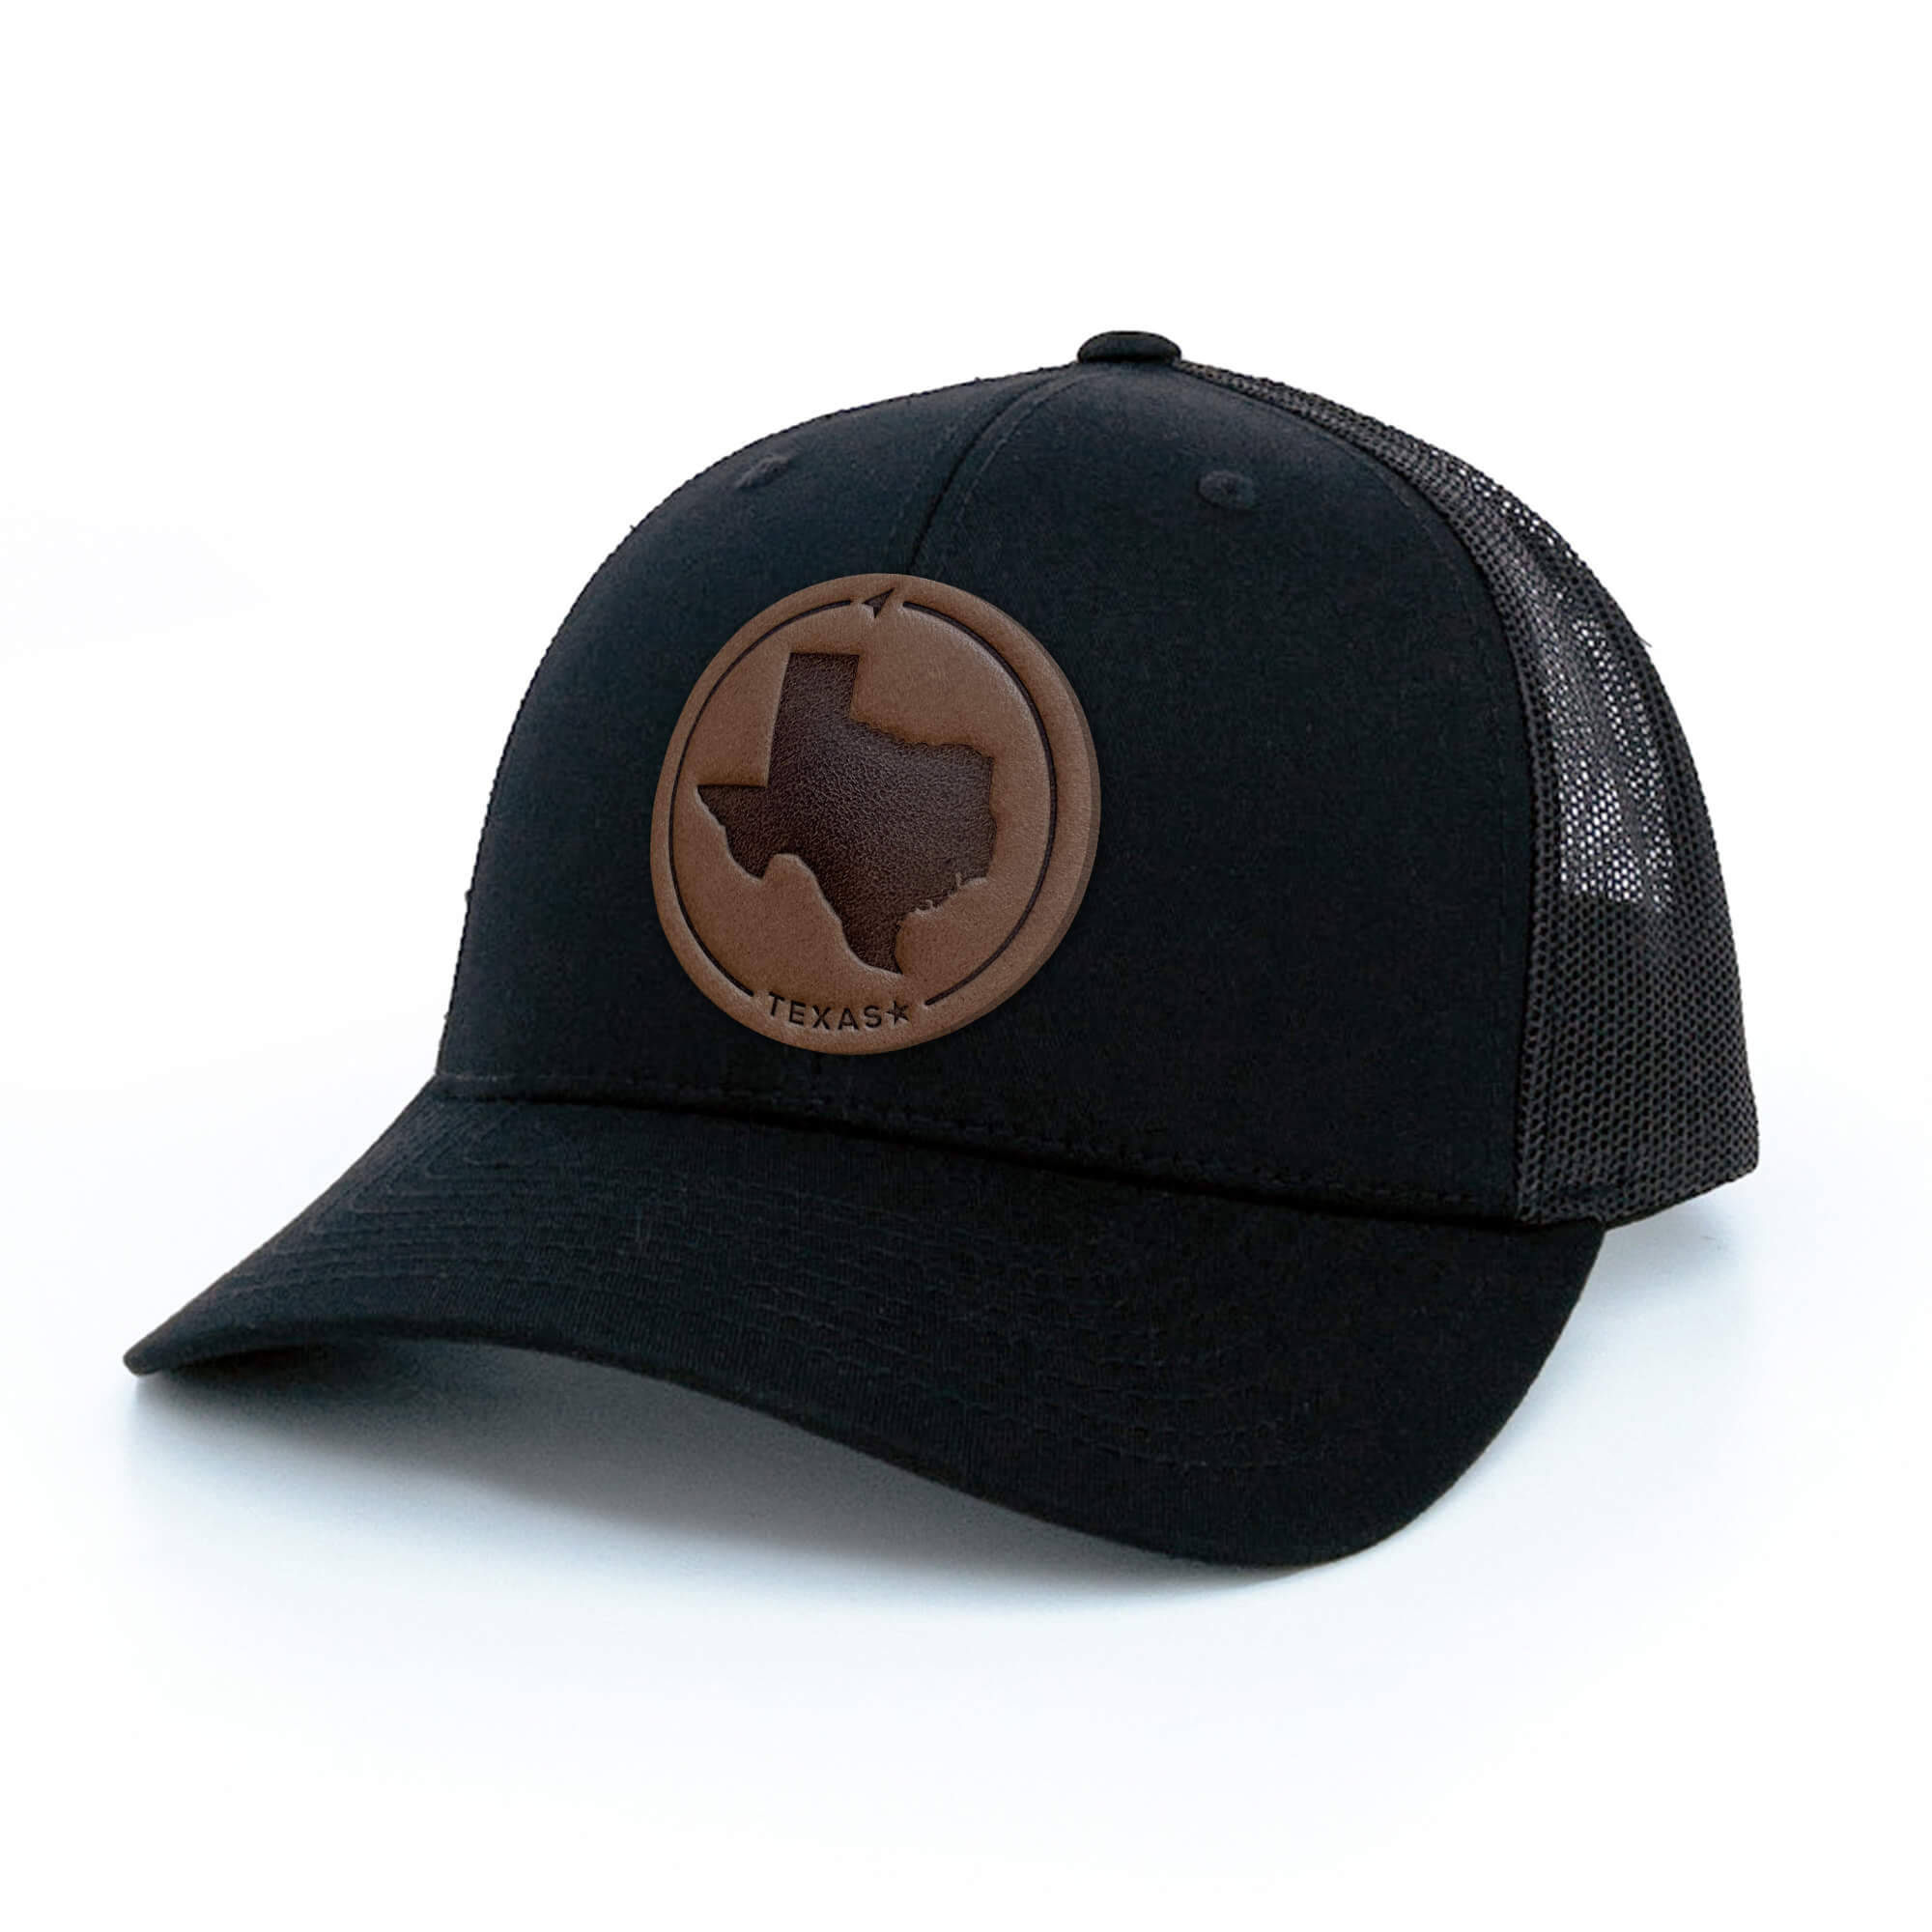 Black trucker hat with full-grain leather patch of Texas | BLACK-003-002, CHARC-003-002, NAVY-003-002, HGREY-003-002, MOSS-003-002, BROWN-003-002